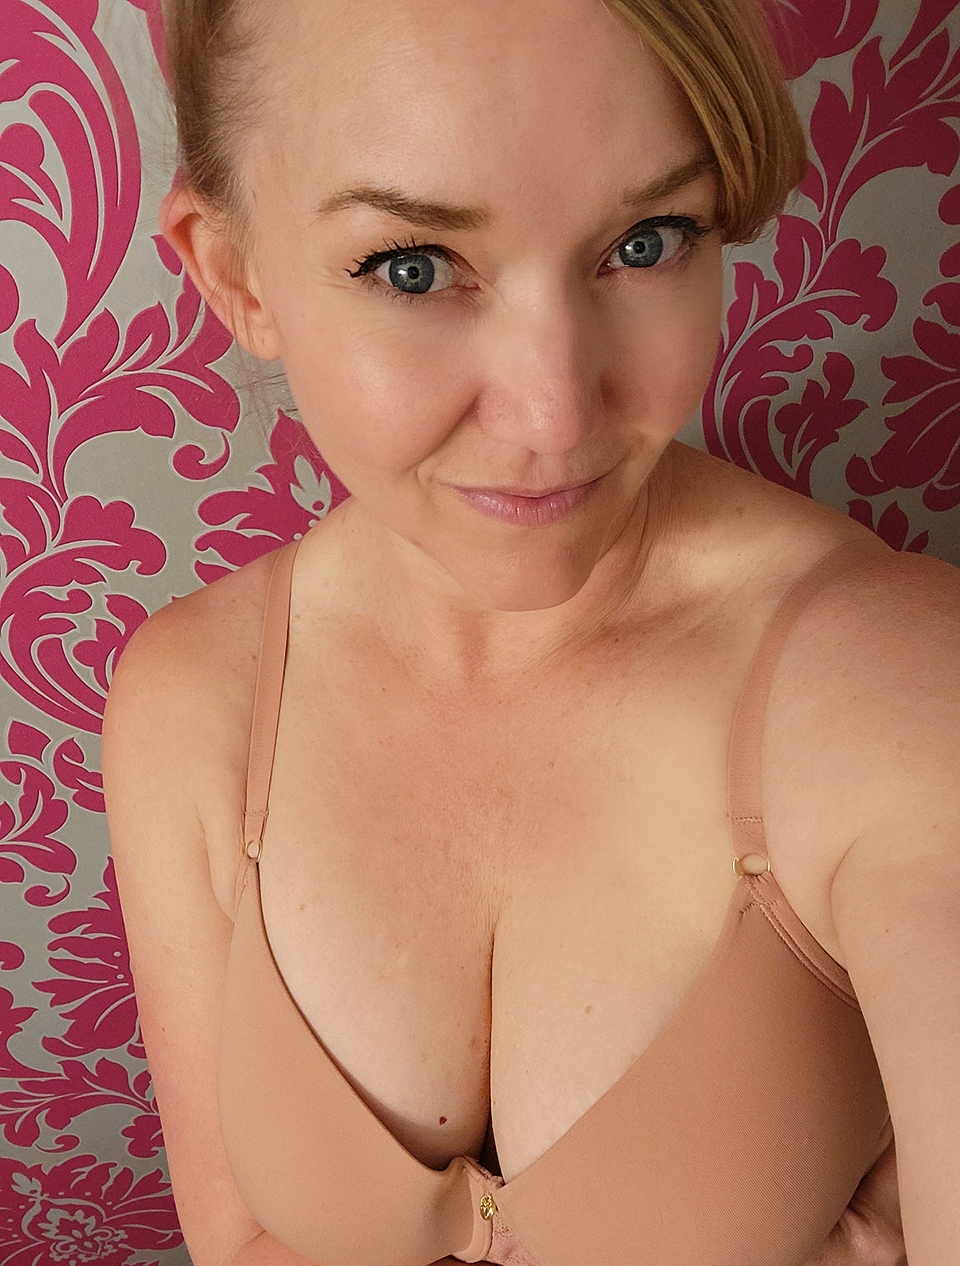 Natural Mom cleavage [F47]